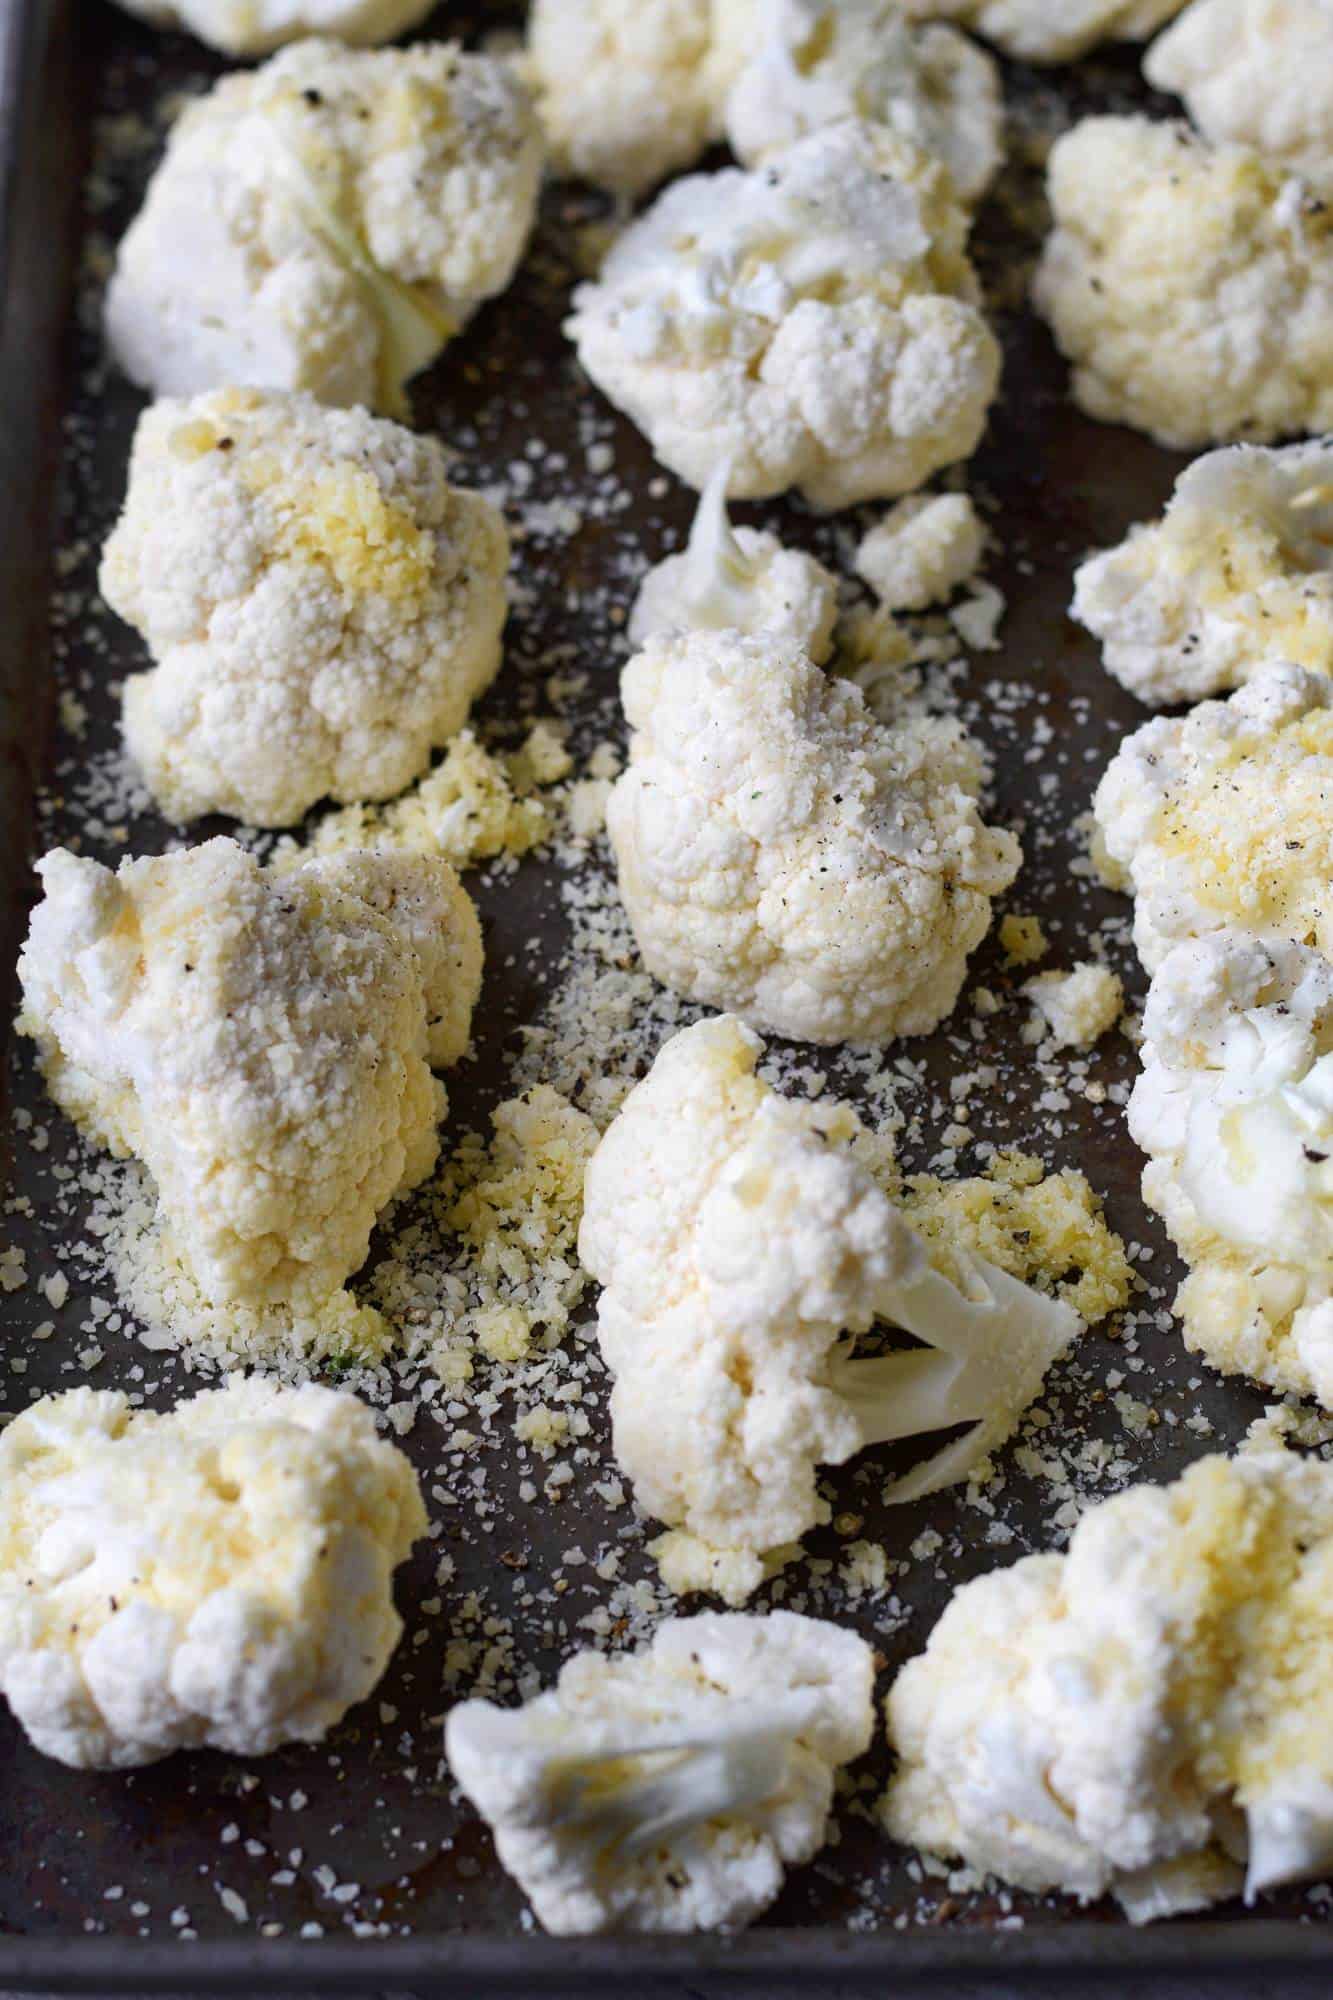 A baking sheet with raw cauliflower tossed in parmesan cheese.